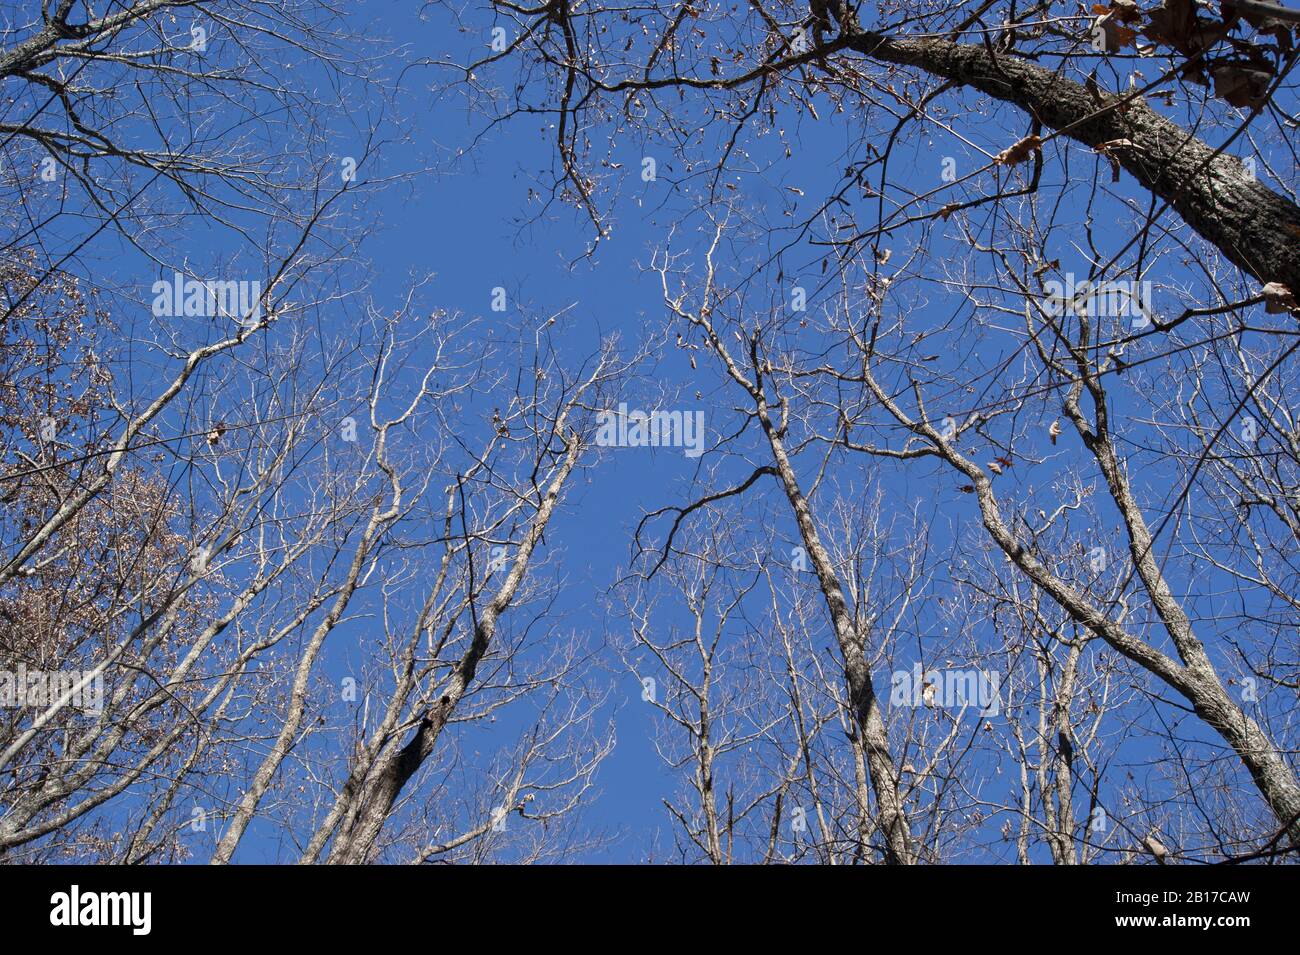 Bare trees against a bright blue sky with no clouds Stock Photo